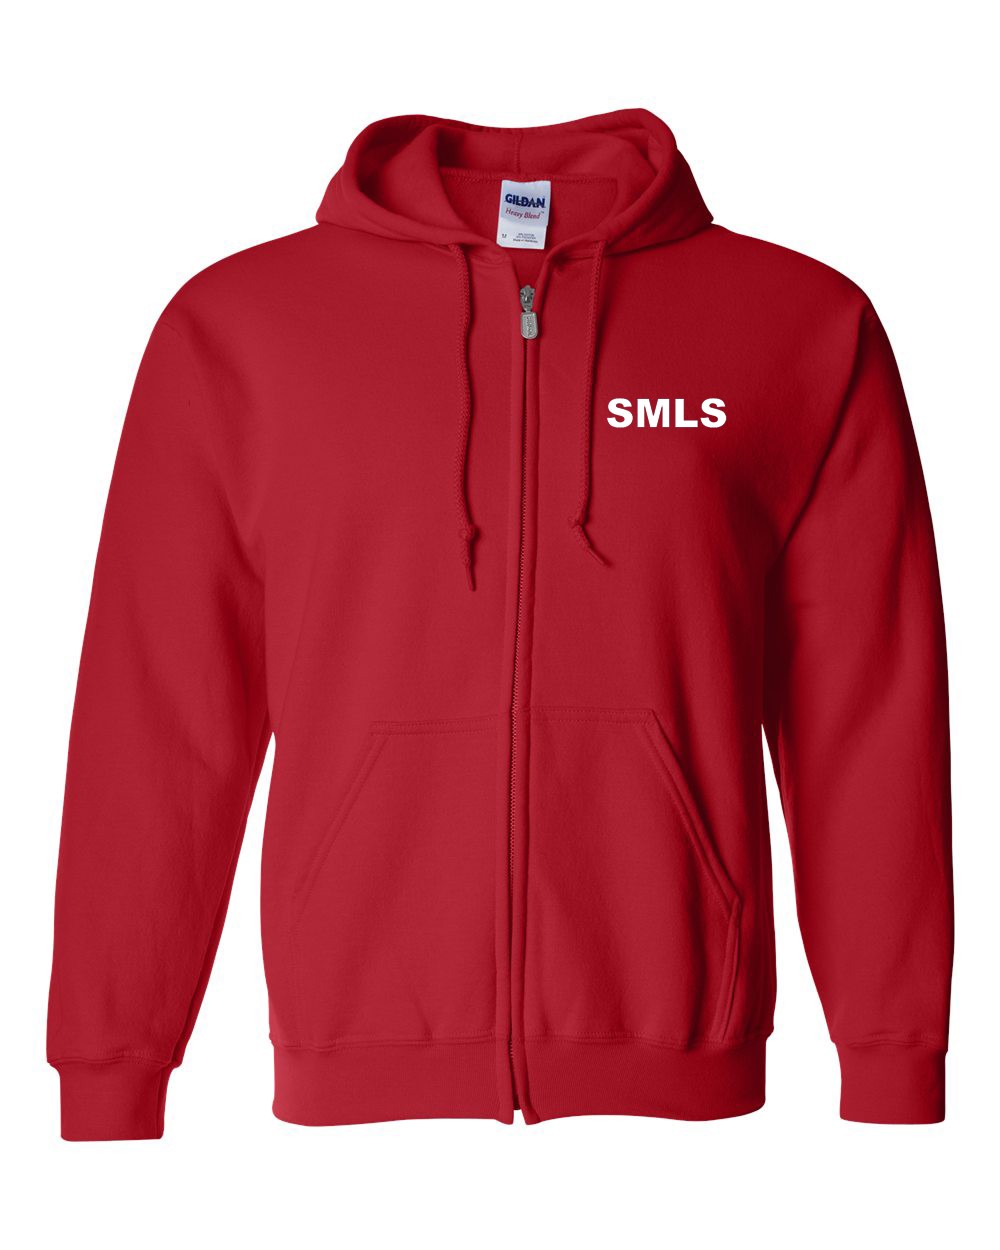 SMLS Staff Zipper Hoodie w/ St. Mark Lion Logo - Please Allow 2-3 Weeks for Delivery